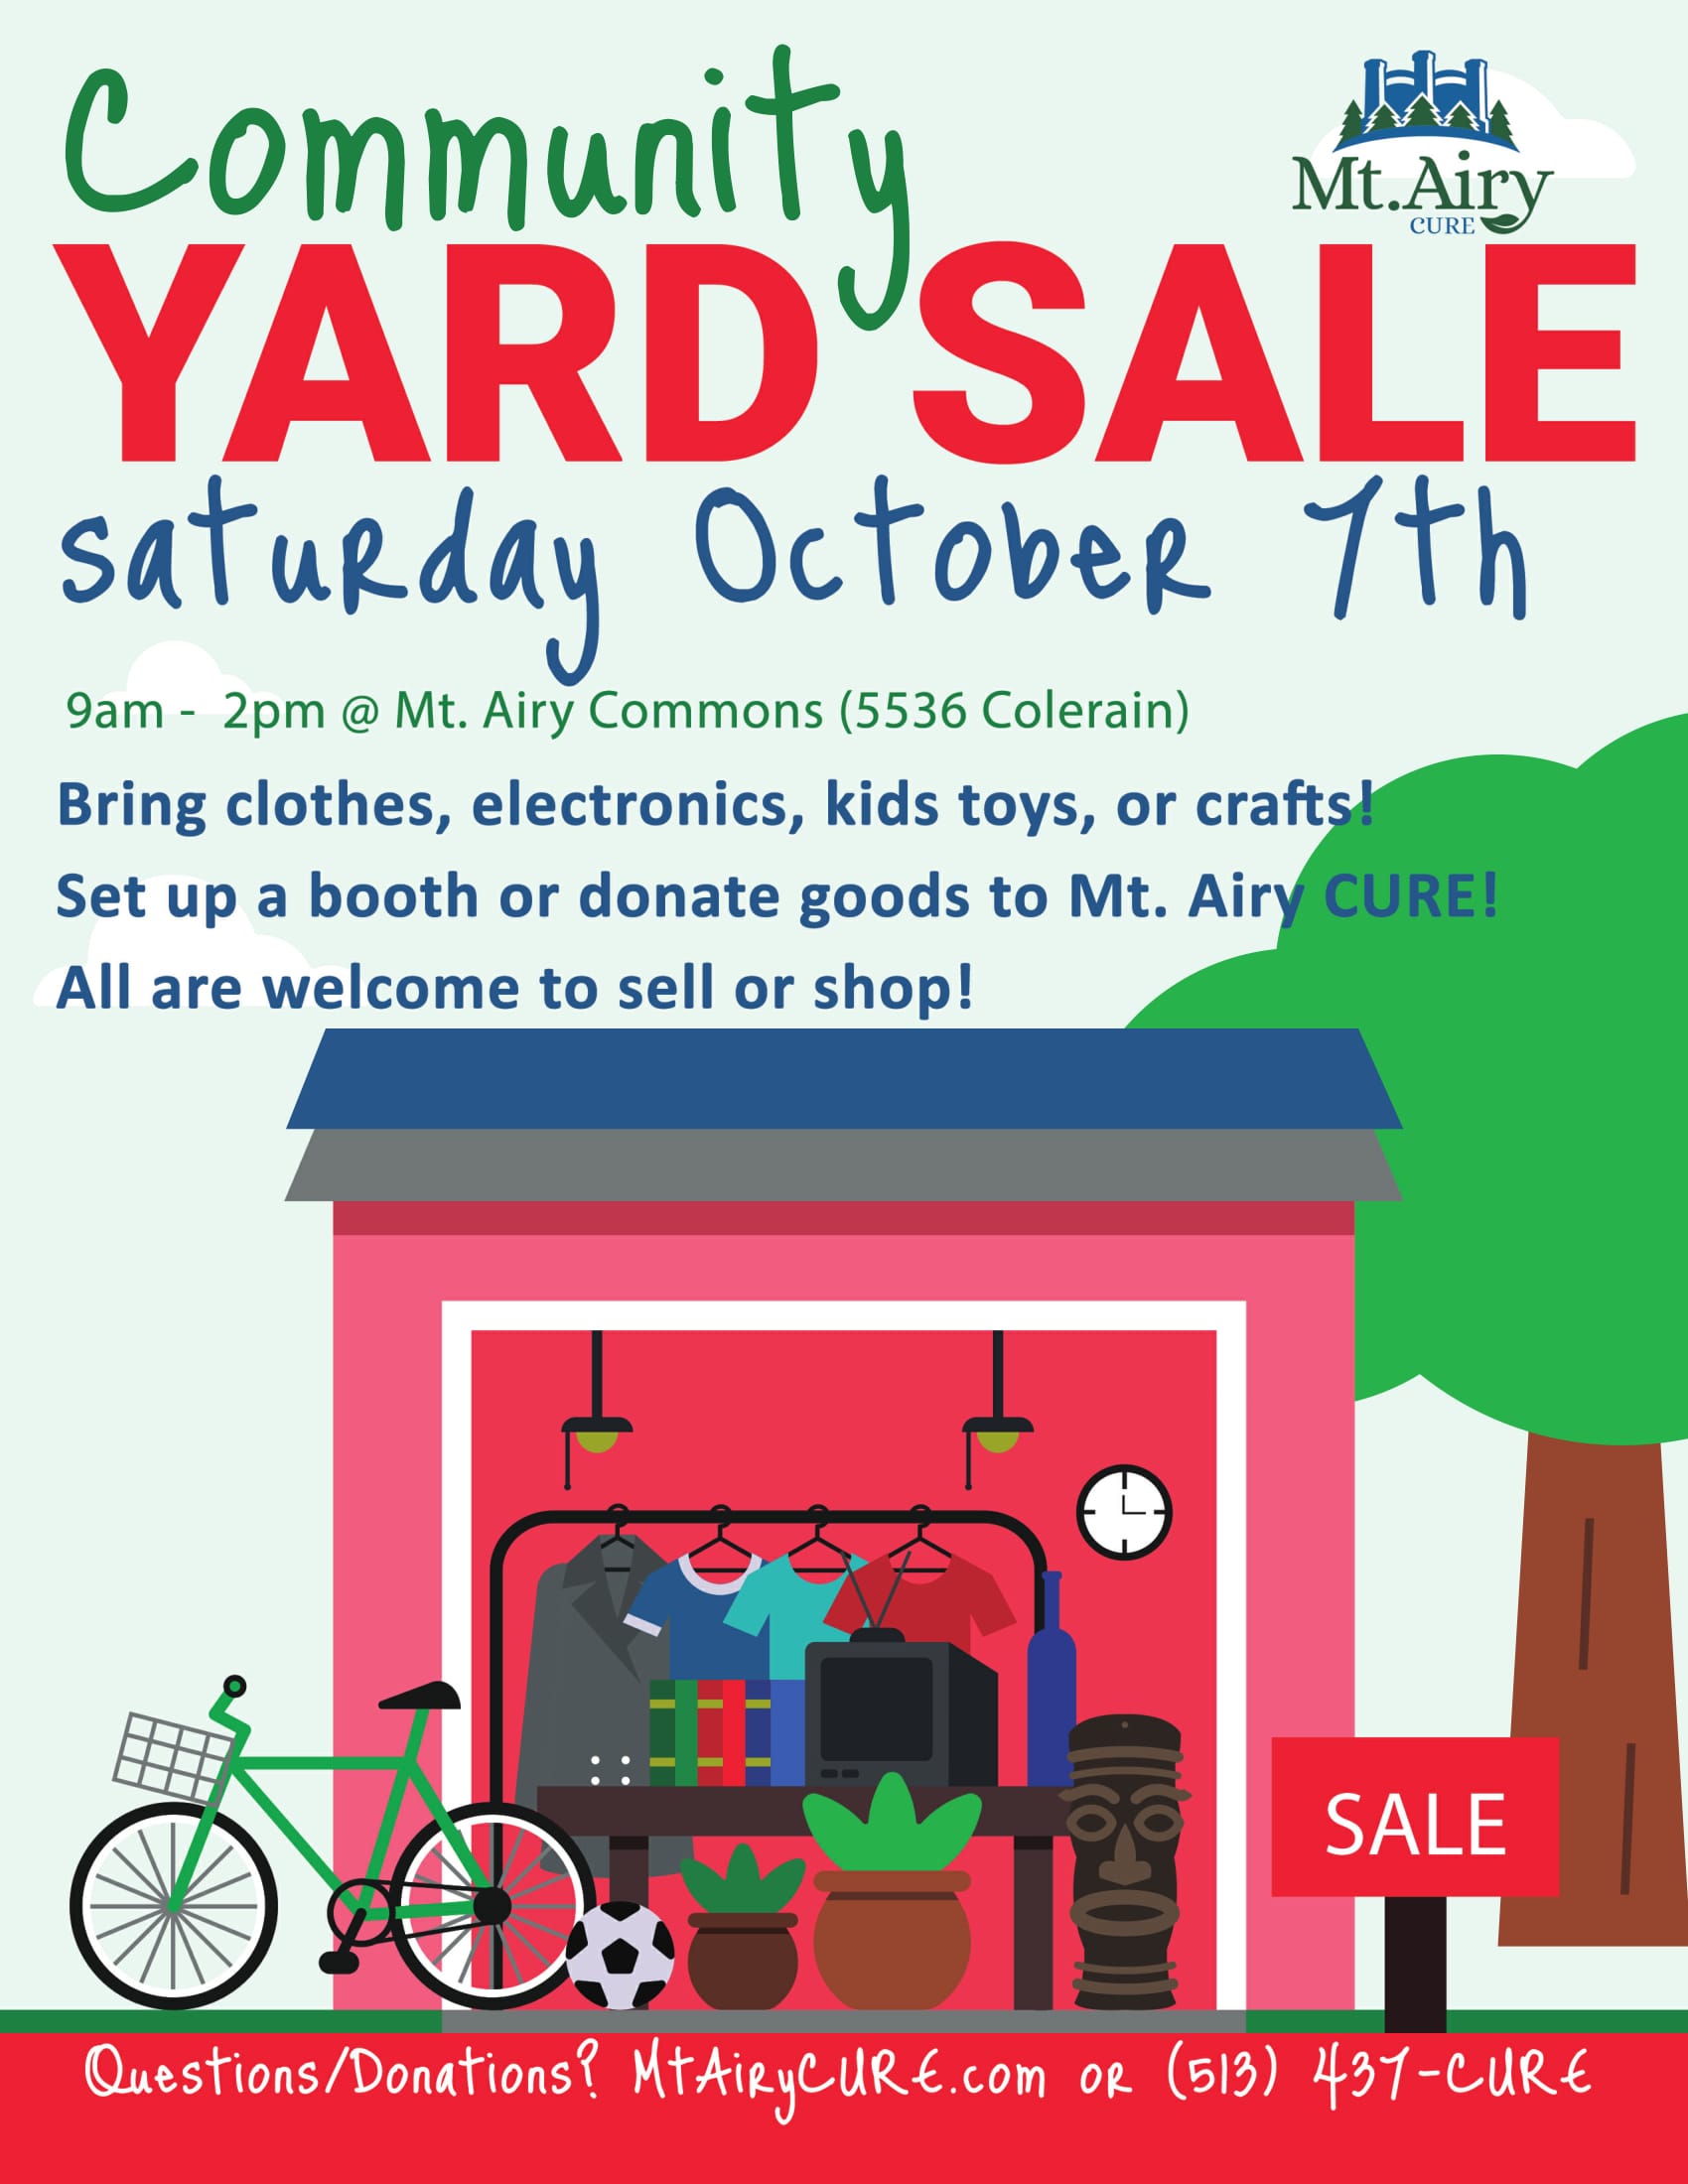 Come to the Mt. Airy Yard Sale Saturday, October 7th